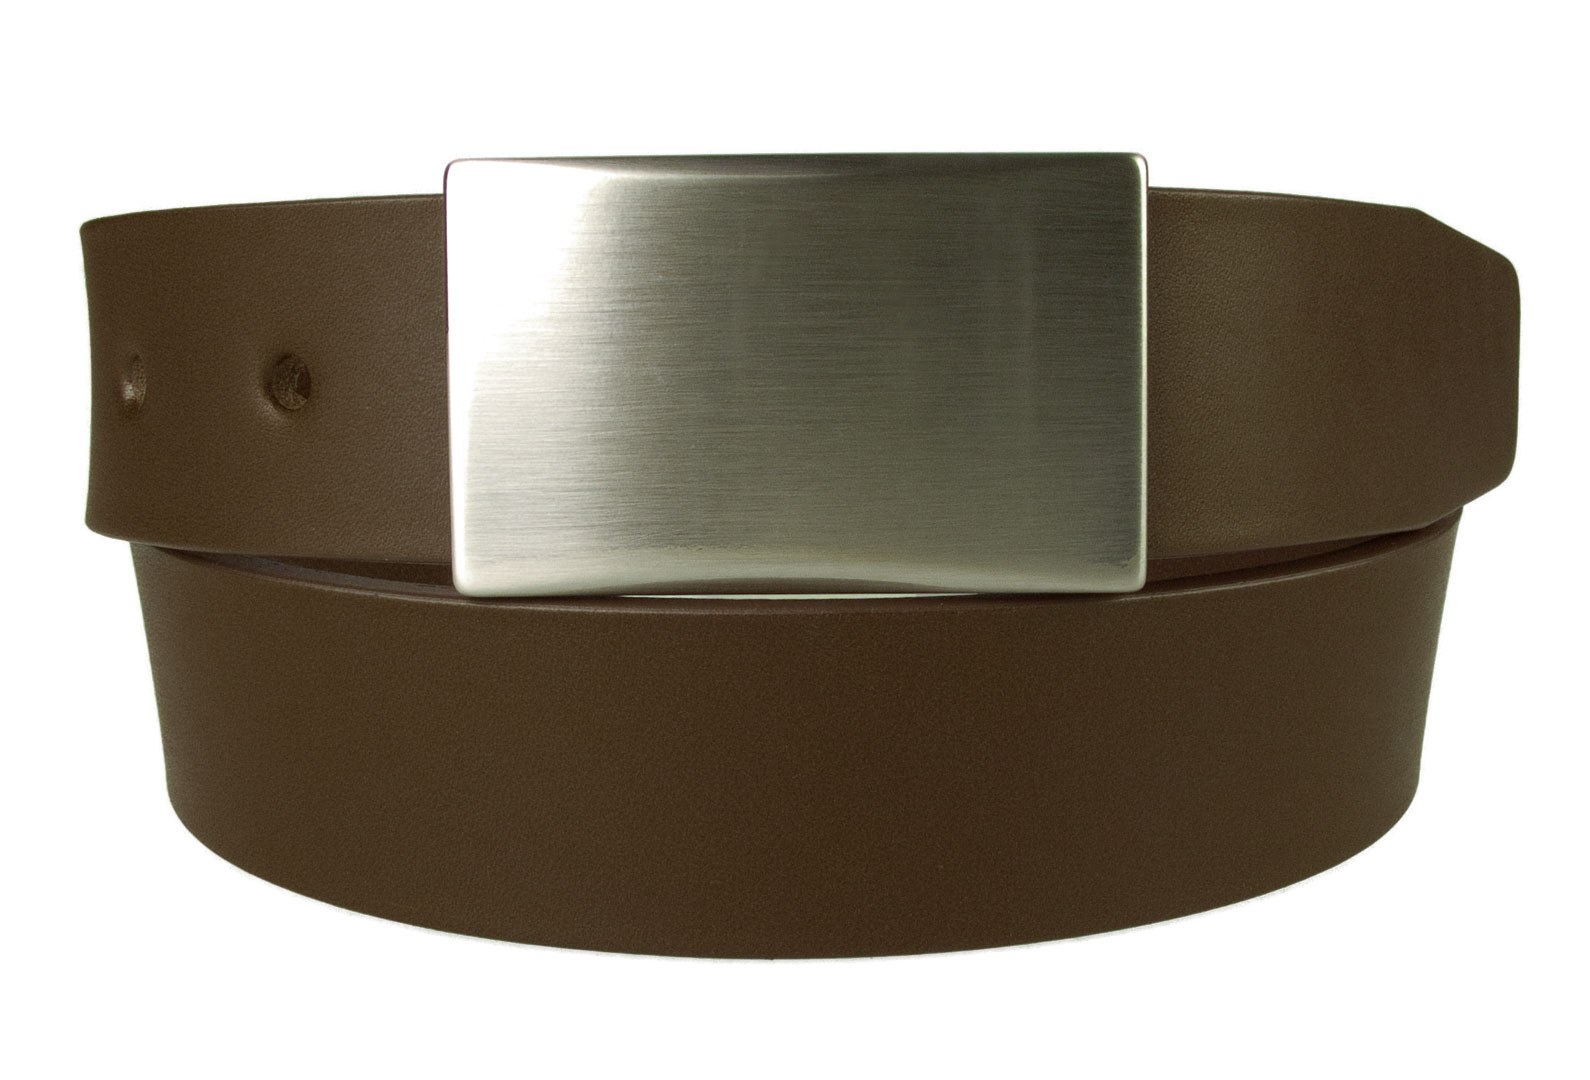 Plaque Belt Brown Leather Made In UK. Italian Full Grain Vegetable Tanned Leather. Hand Brushed Nickel Plated and Lacquered Plate Buckle. Five Adjustment Holes. Free Sliding Belt Loop. 1 3/8 INCH Wide. Leather thickness 3.5 - 4mm.